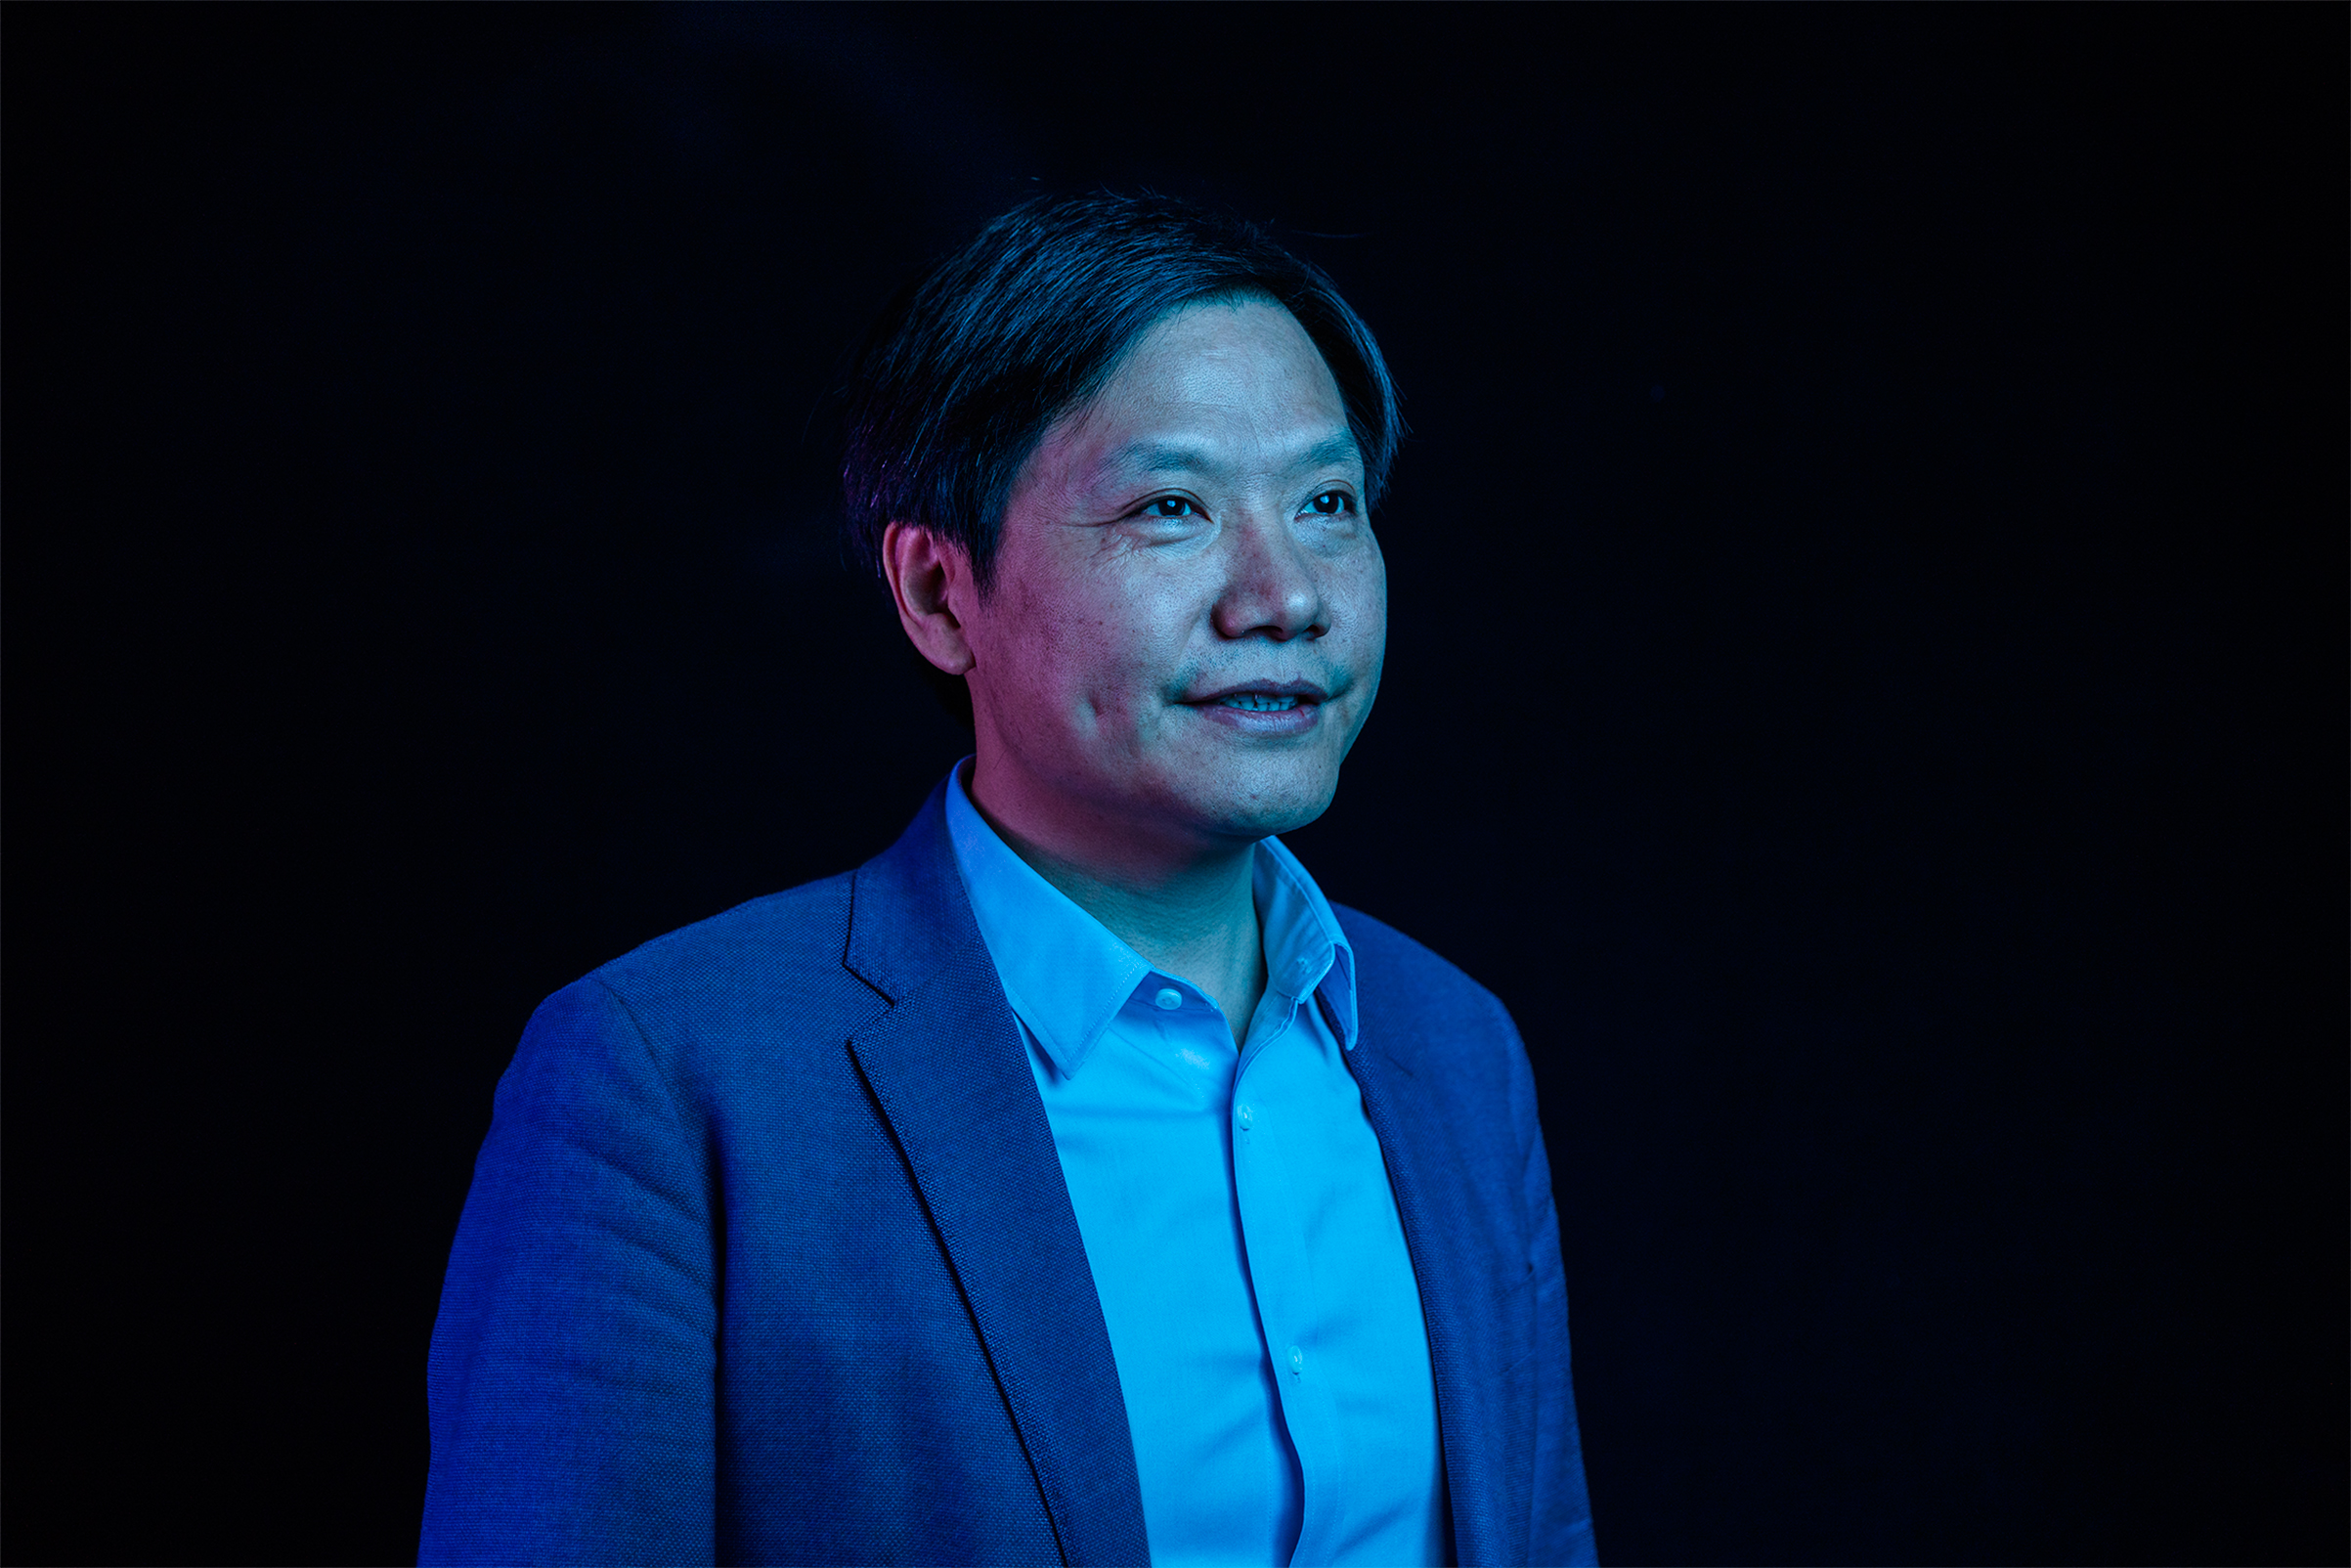 Lei Jun founder and CEO of Xiamoi